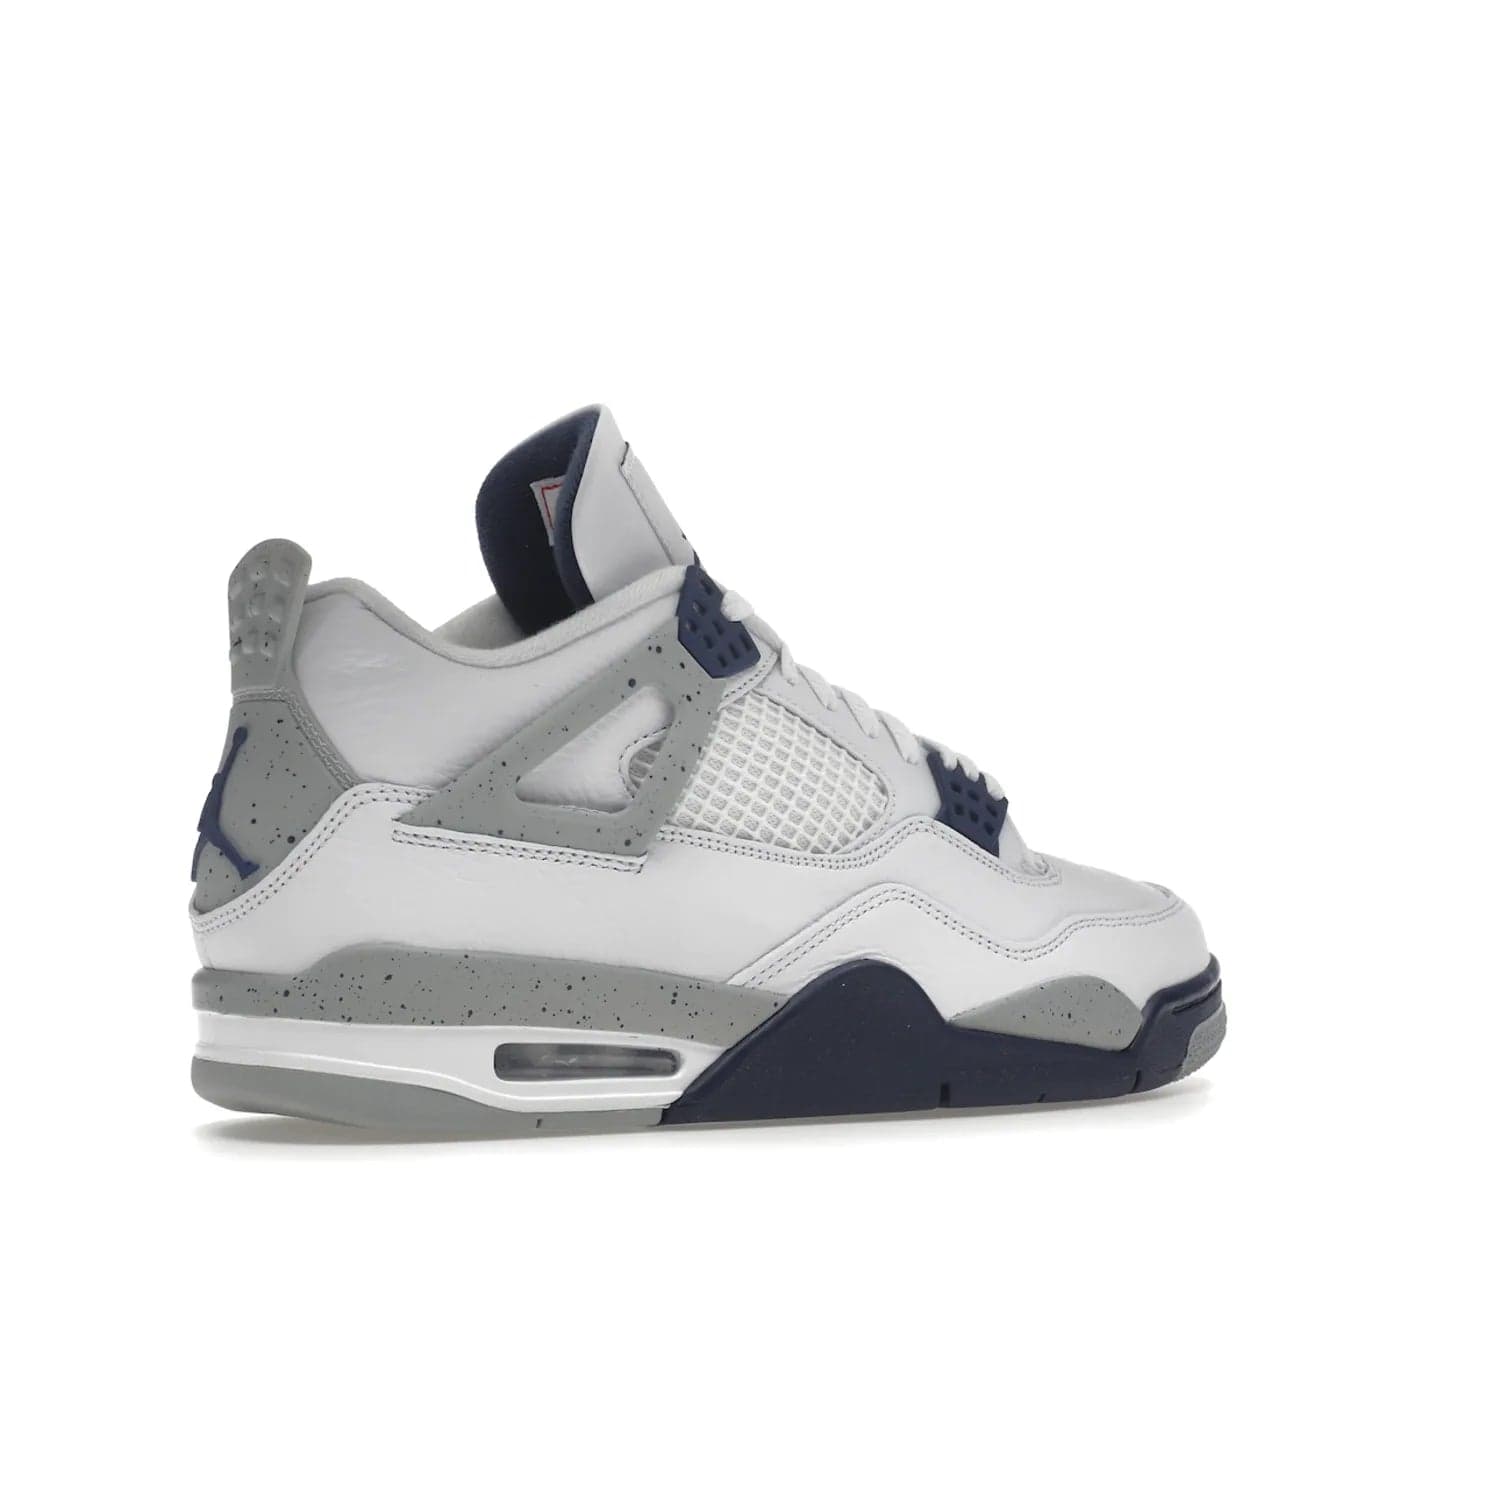 Jordan 4 Retro Midnight Navy - Image 34 - Only at www.BallersClubKickz.com - Shop the Air Jordan Retro 4 White Midnight Navy. Stand out with a classic white leather upper, black support wings, midnight navy eyelets, and Crimson Jumpman tongue tag. Unbeatable comfort with two-tone polyurethane midsole with encapsulated Air technology. Get yours before October 29th, 2022.